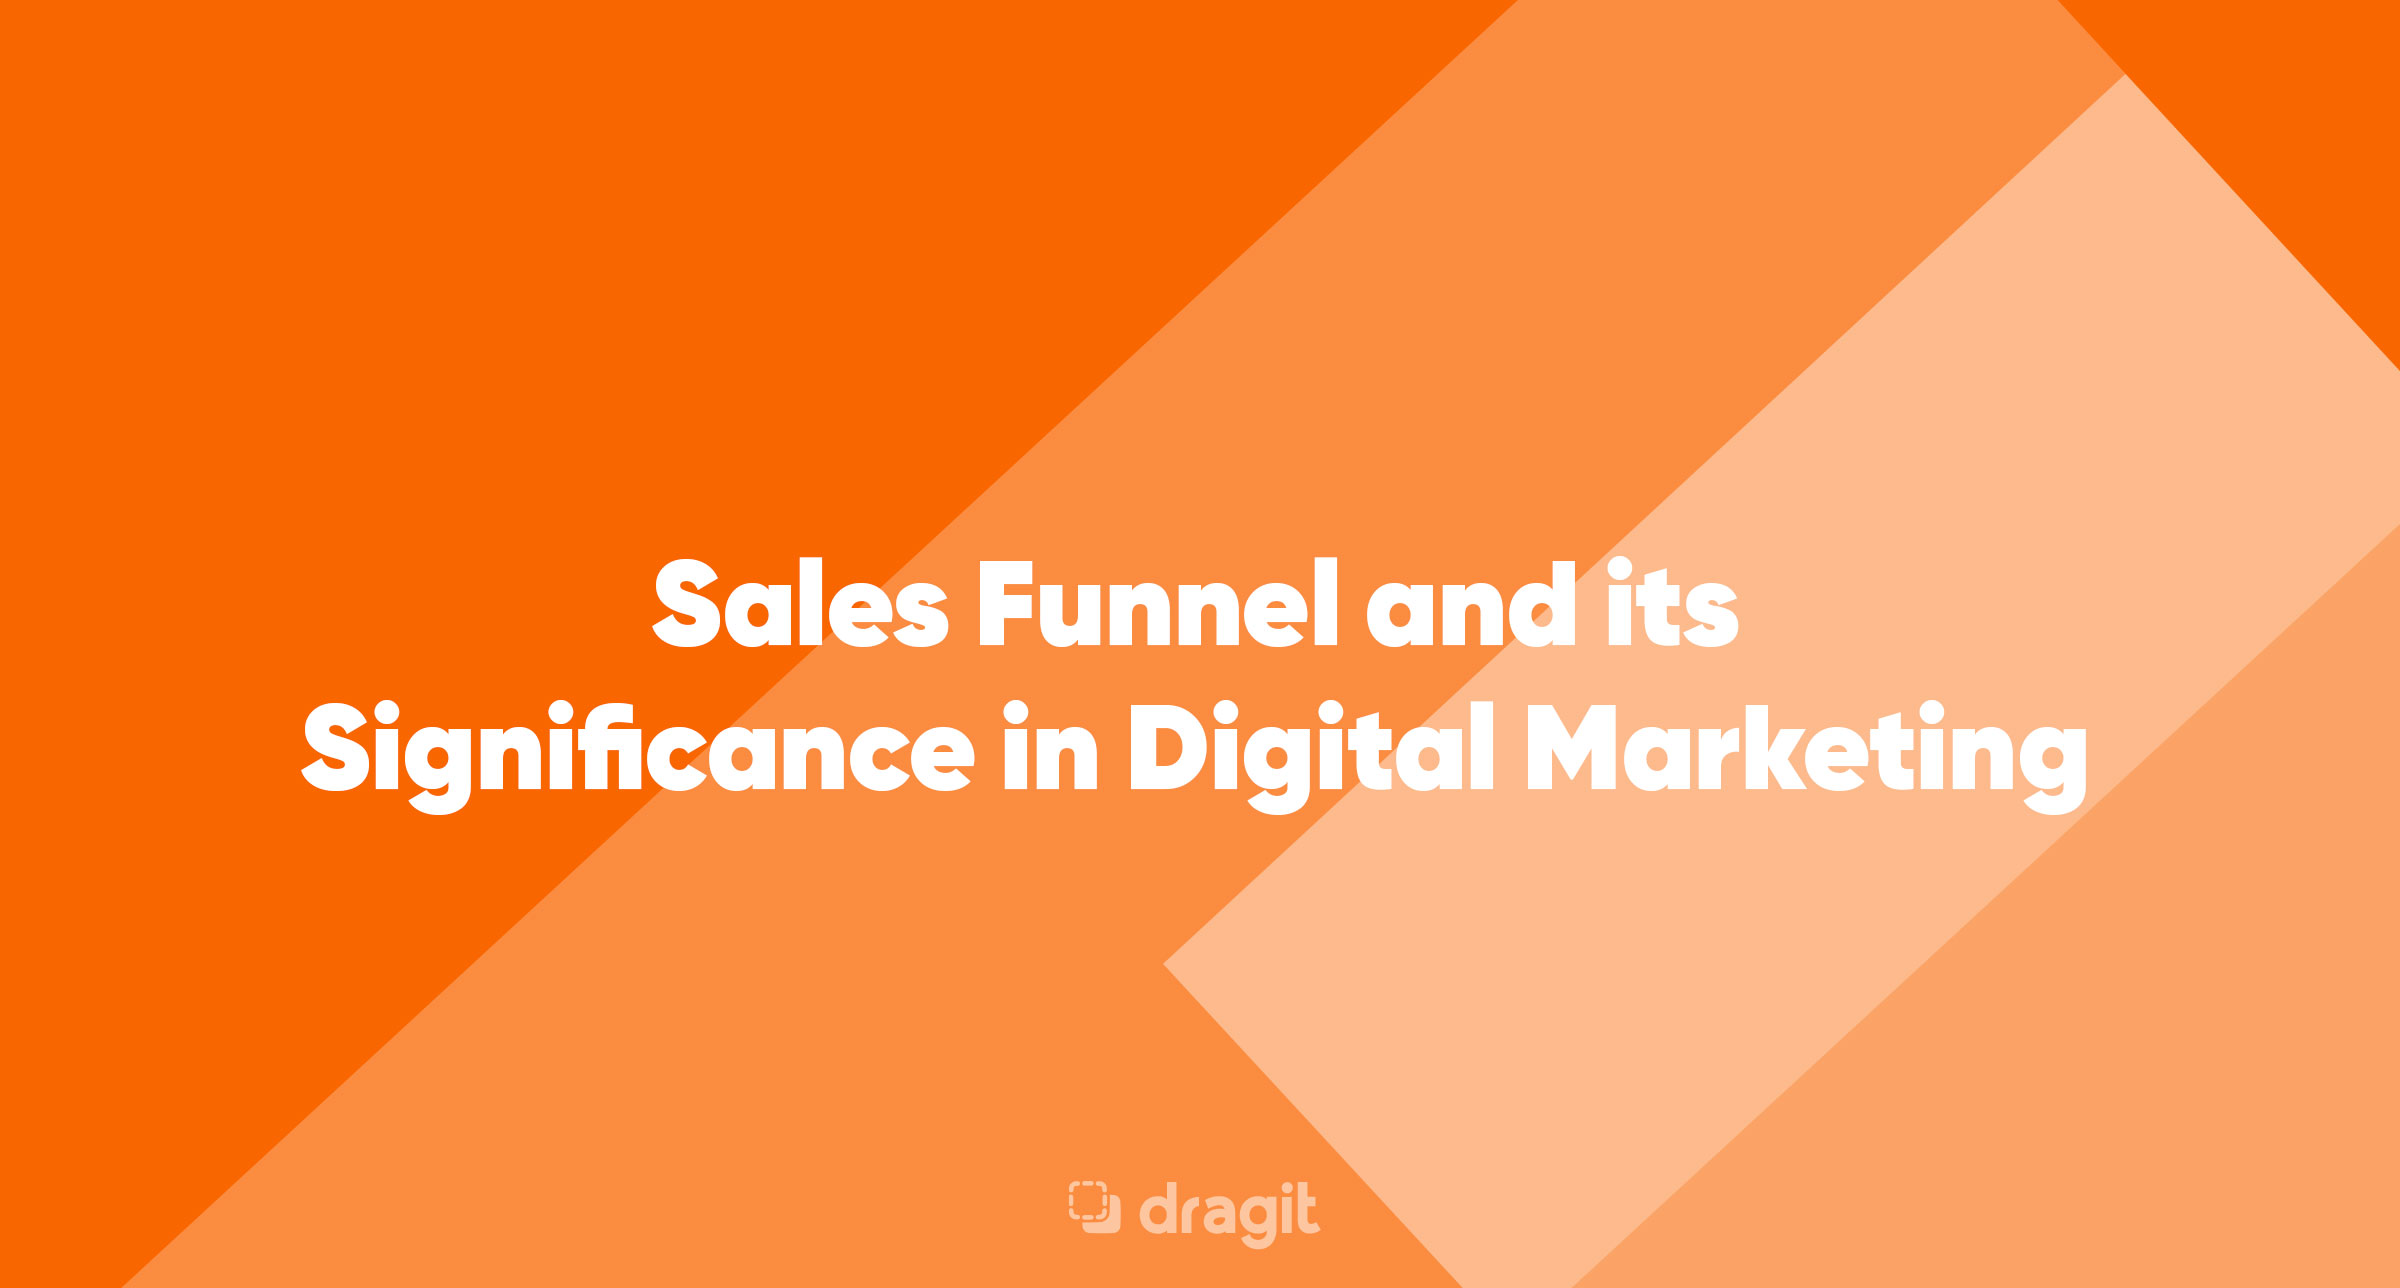 Article | Sales Funnel and its Significance in Digital Marketing